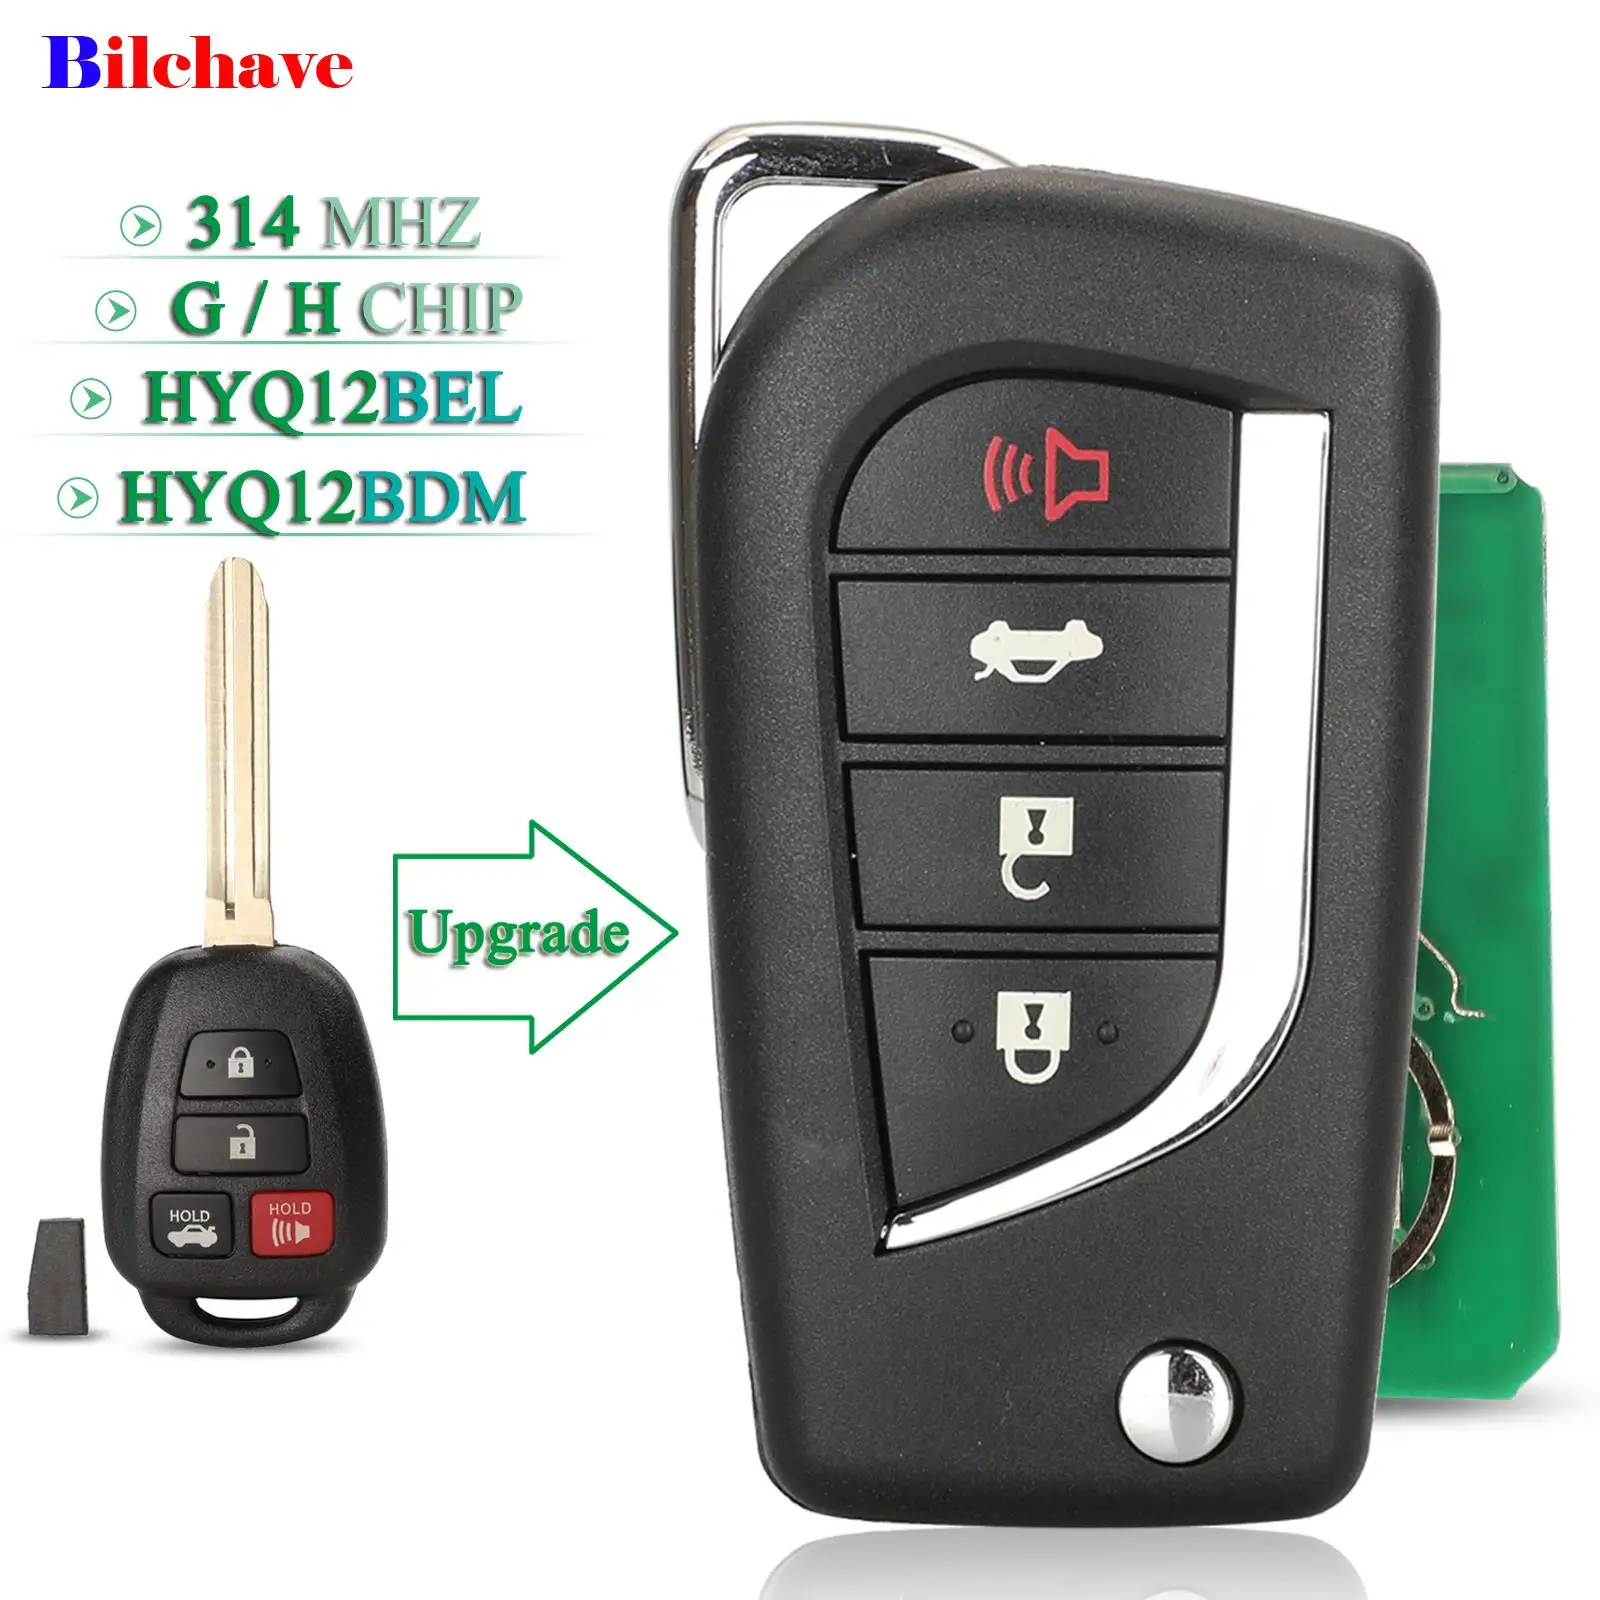 

jingyuqin Modified For Toyota CAMRY 2012 2013 2014 2015 Corolla 4 Buttons Remote Car Key 314Mhz HYQ12BDM HYQ12BEL G / H Chip Fob